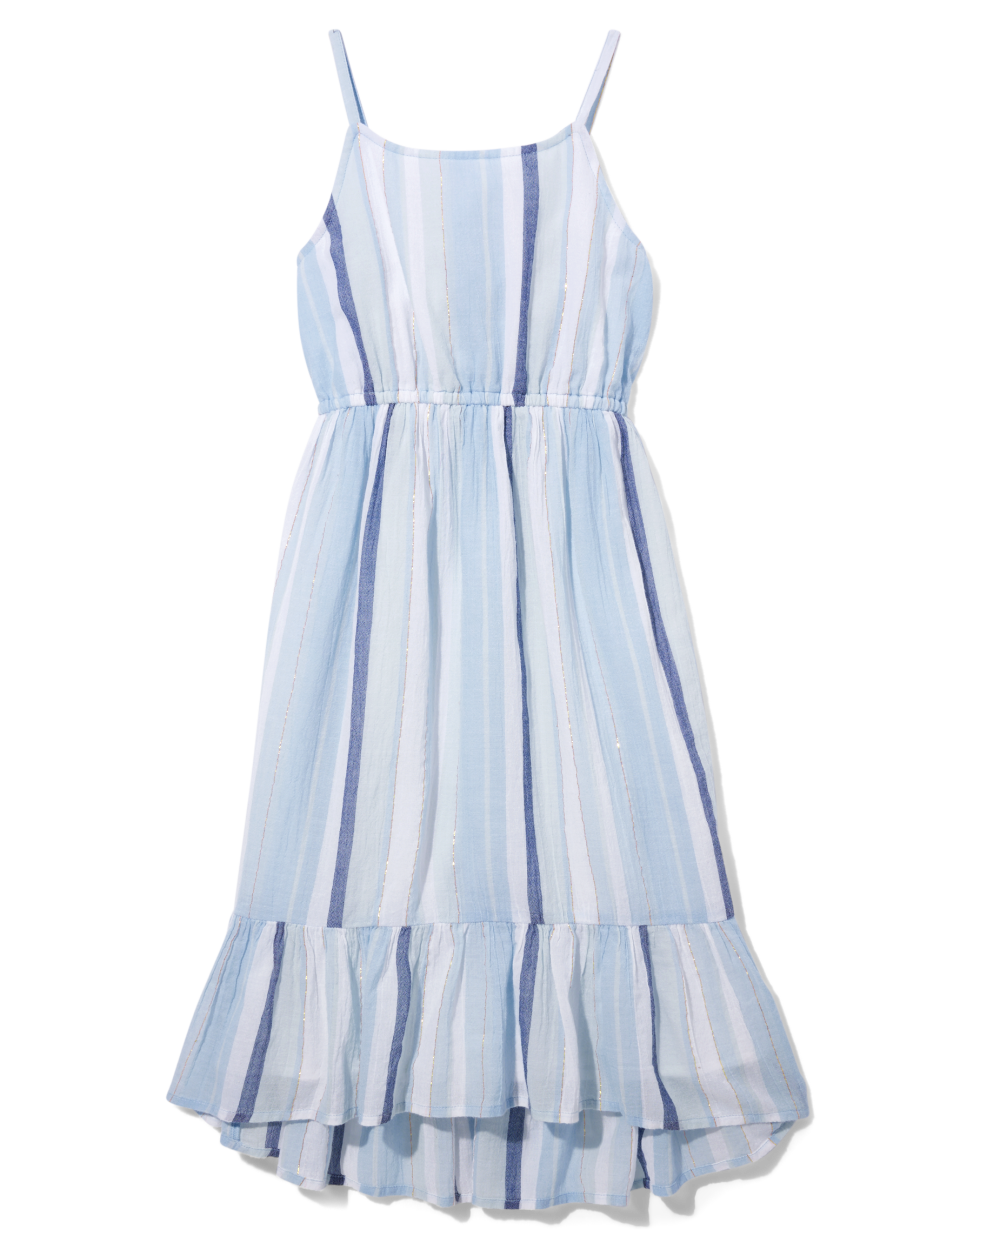 Girls Sleeveless Spaghetti Strap Above the Knee Striped Print Round Neck Smocked Tiered Dress With Ruffles